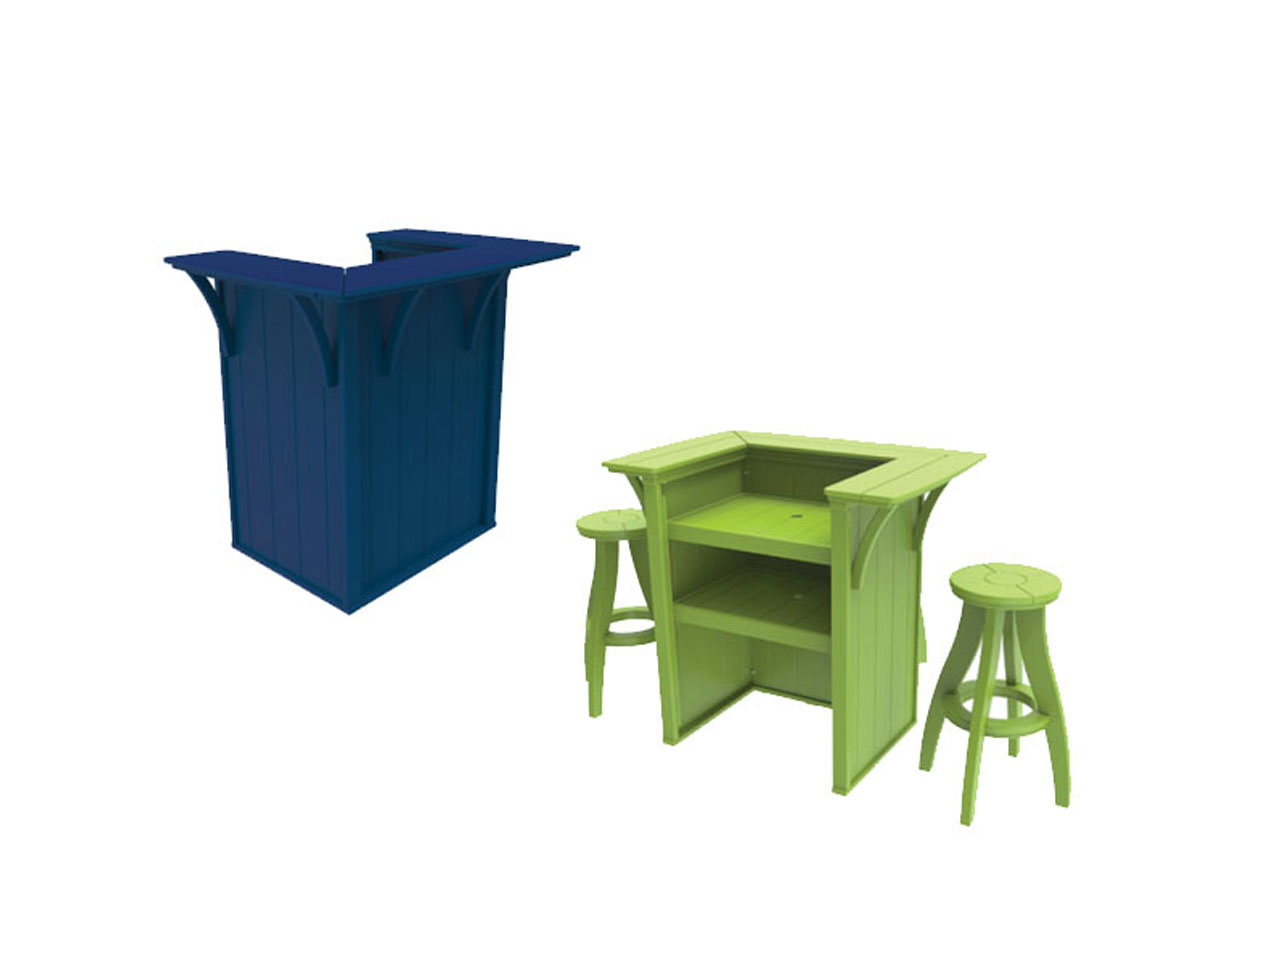 green and blue poly bar tables against a white background